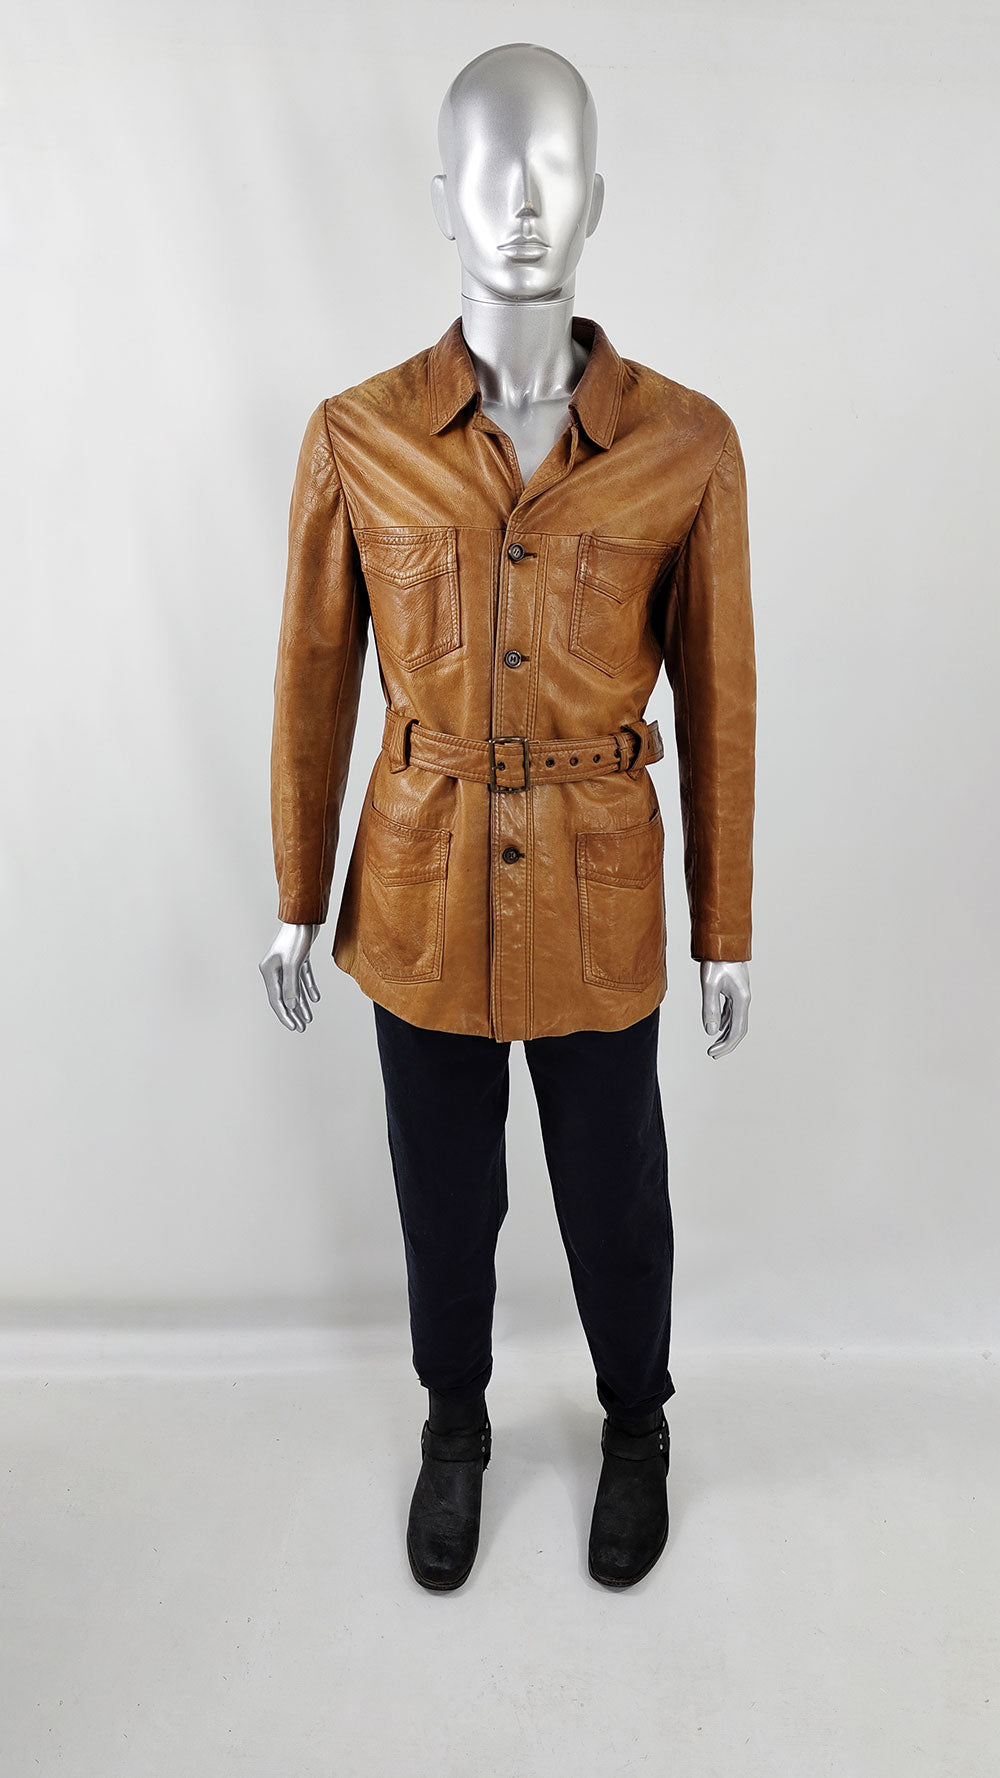  Genuine vintage brown / tan leather jacket with four patch pockets and a matching belt.